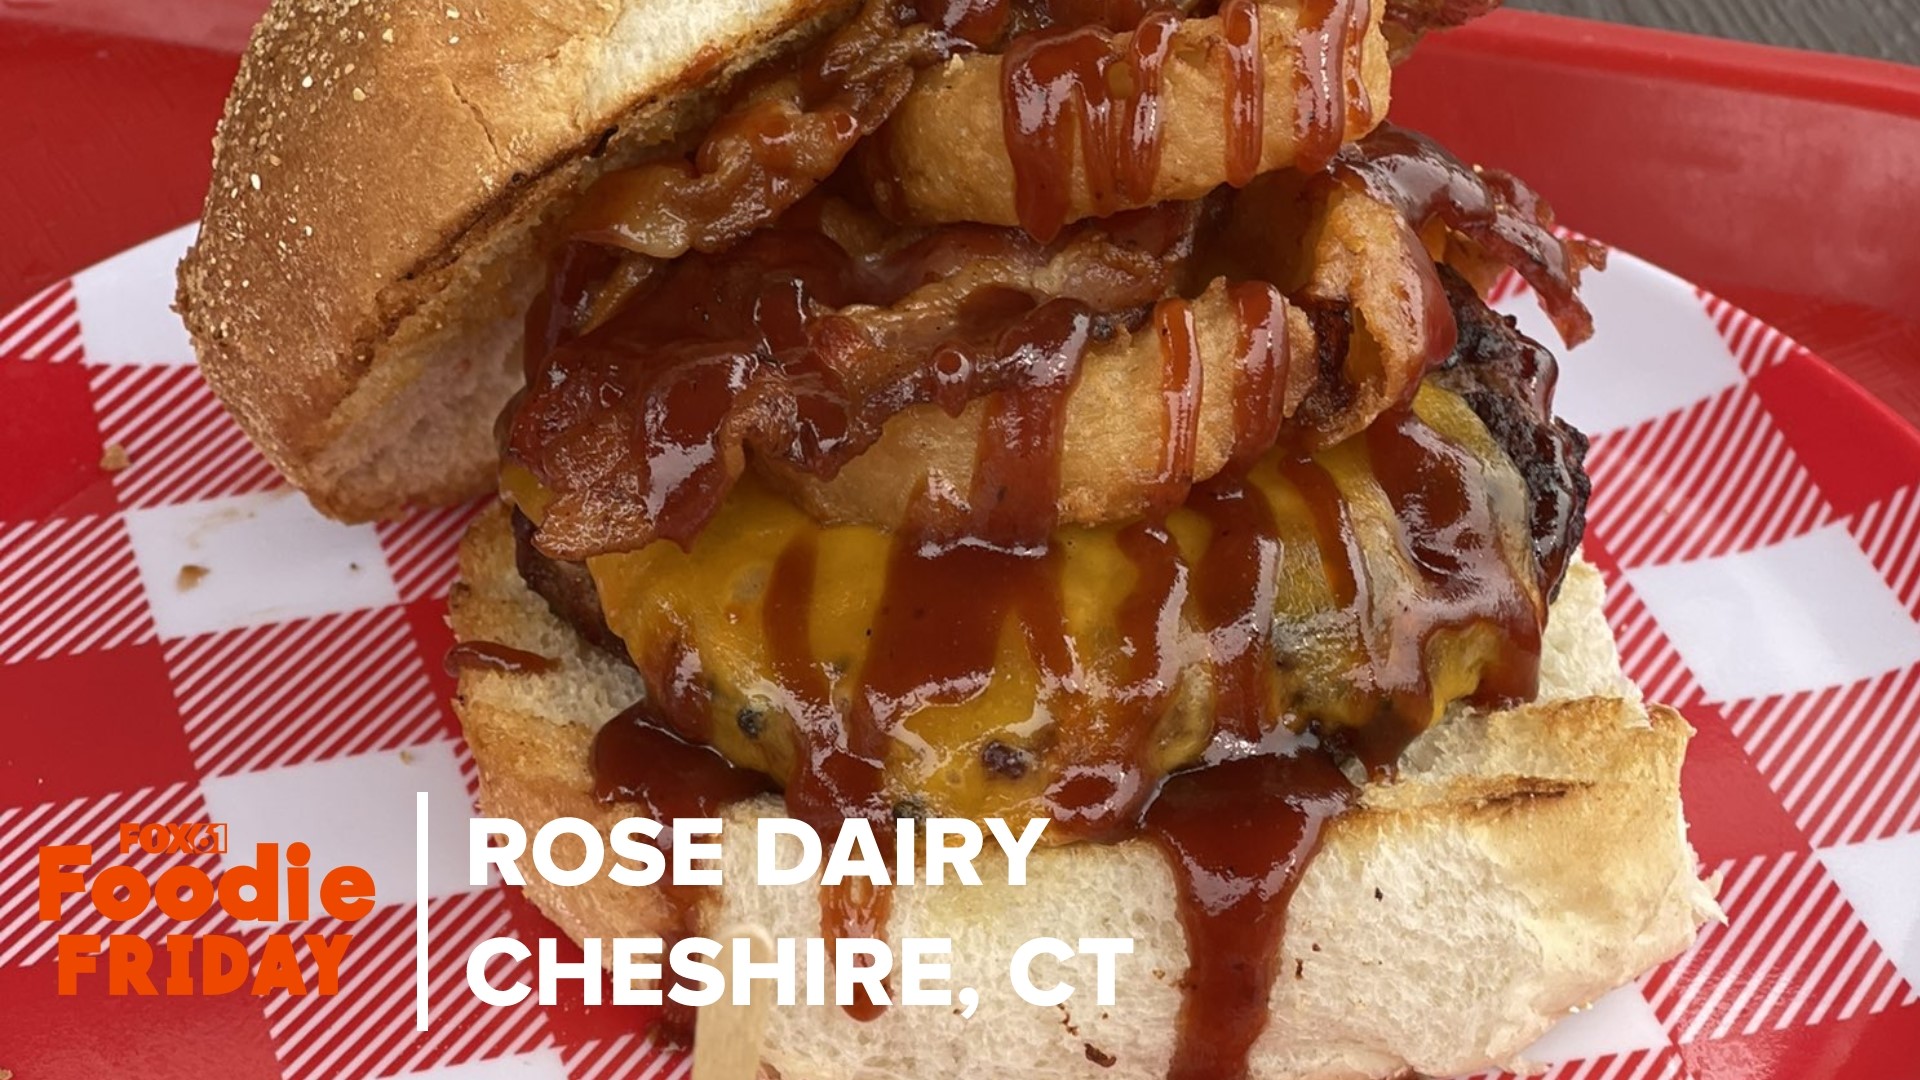 Rose Dairy in Cheshire serves up everything fresh with a creative menu